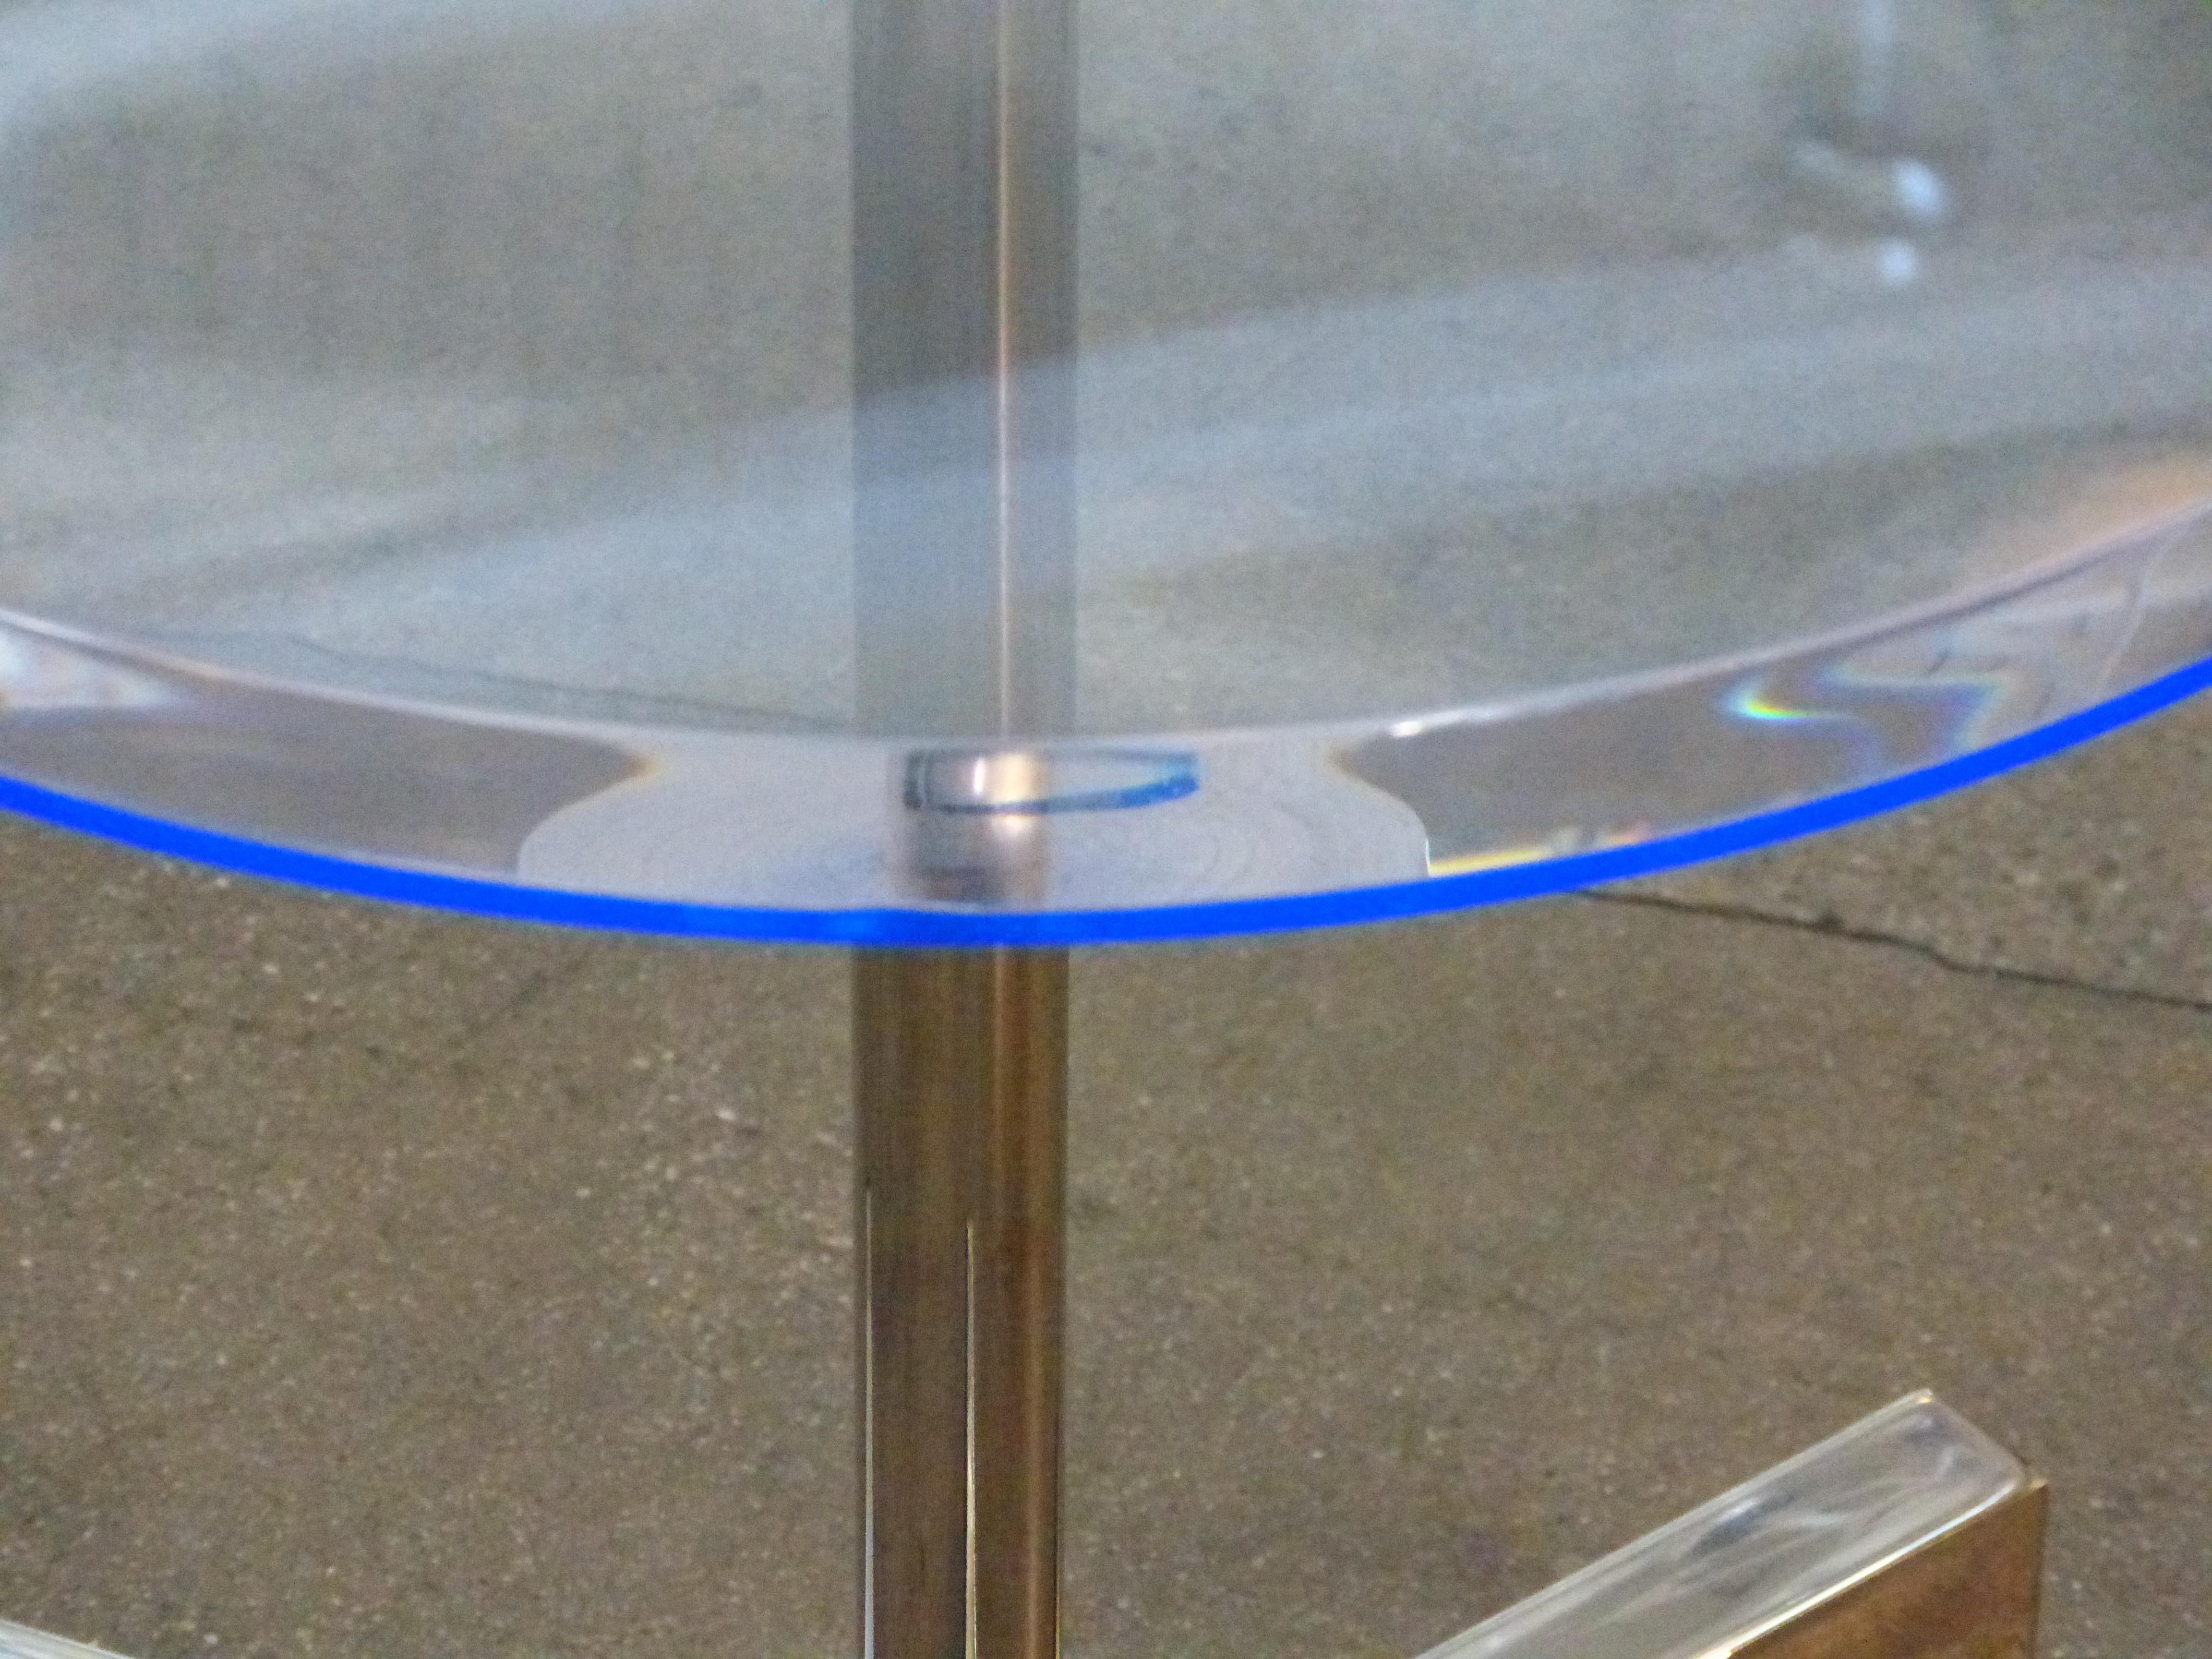 A beautiful side table designed by Charles Hollis Jones for Arthur Elrod, this table features a blue highlight to the underside of the Lucite top, and really pops on the edges. Some slight handling marks and imperfections.